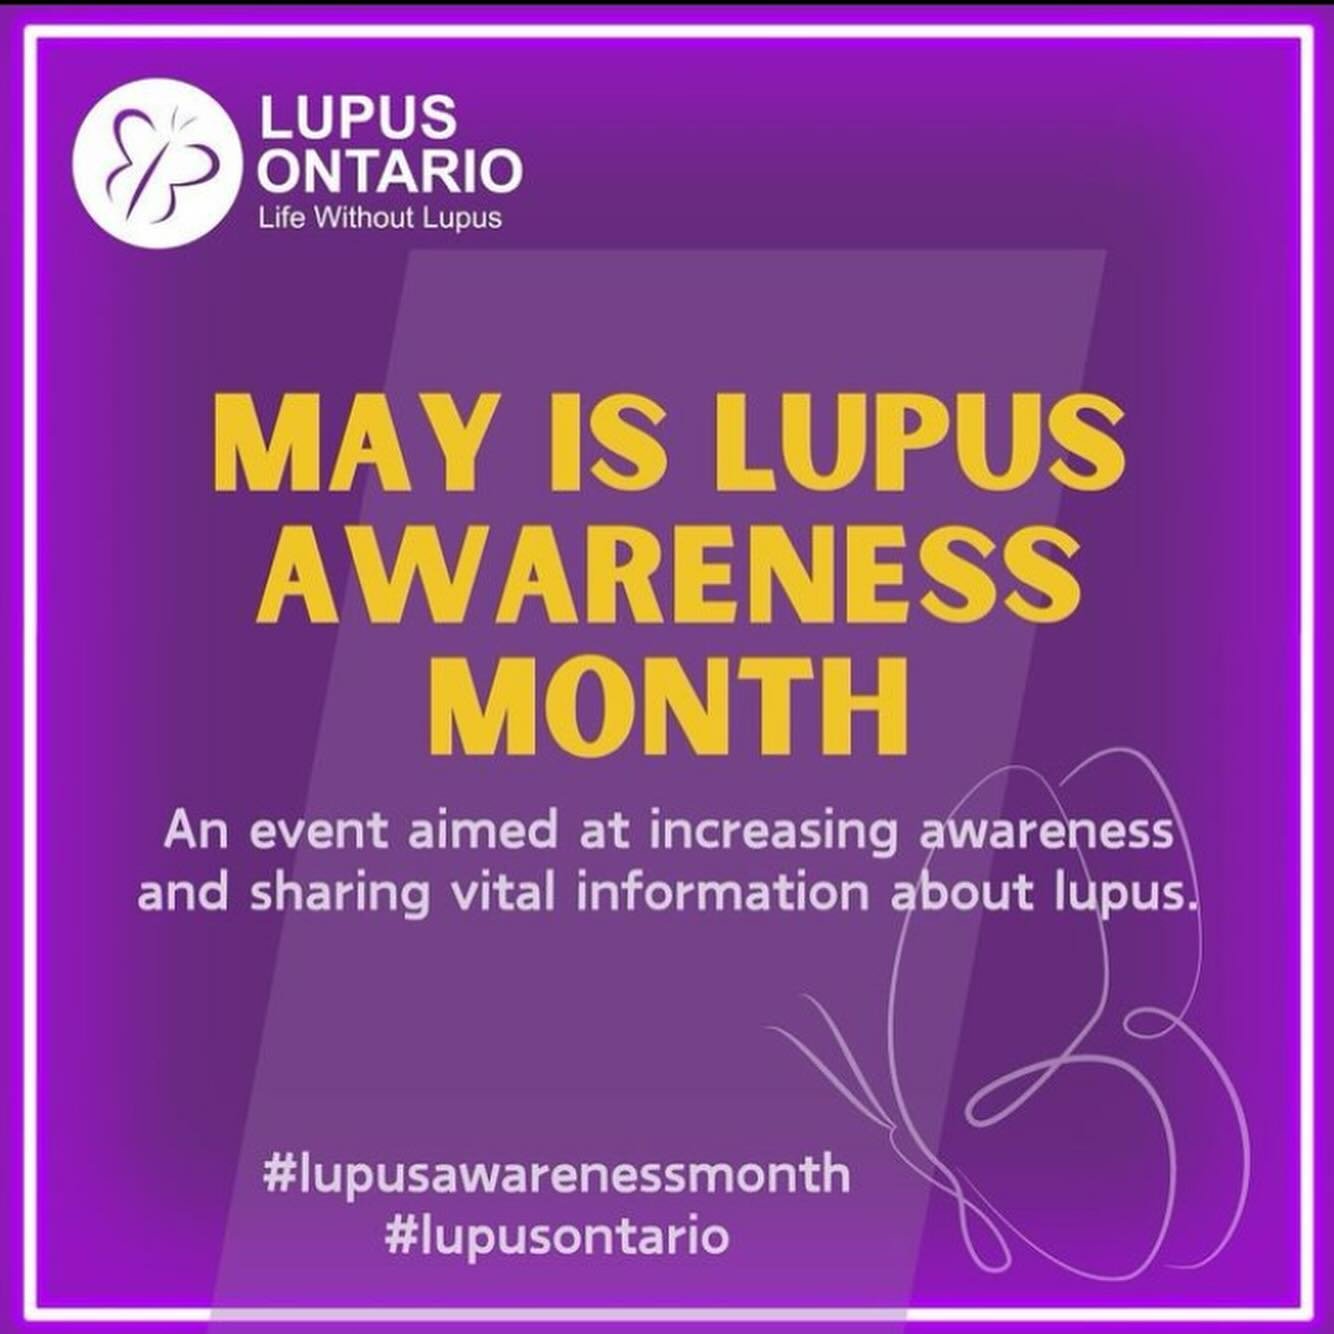 May is Lupus Awareness Month!

I was diagnosed with Lupus in 2010 after having full body pain for over a year. We now also know that my first lupus flare was in 2002 when I went through a year of crazy symptoms that no doctor could figure out. Irregu